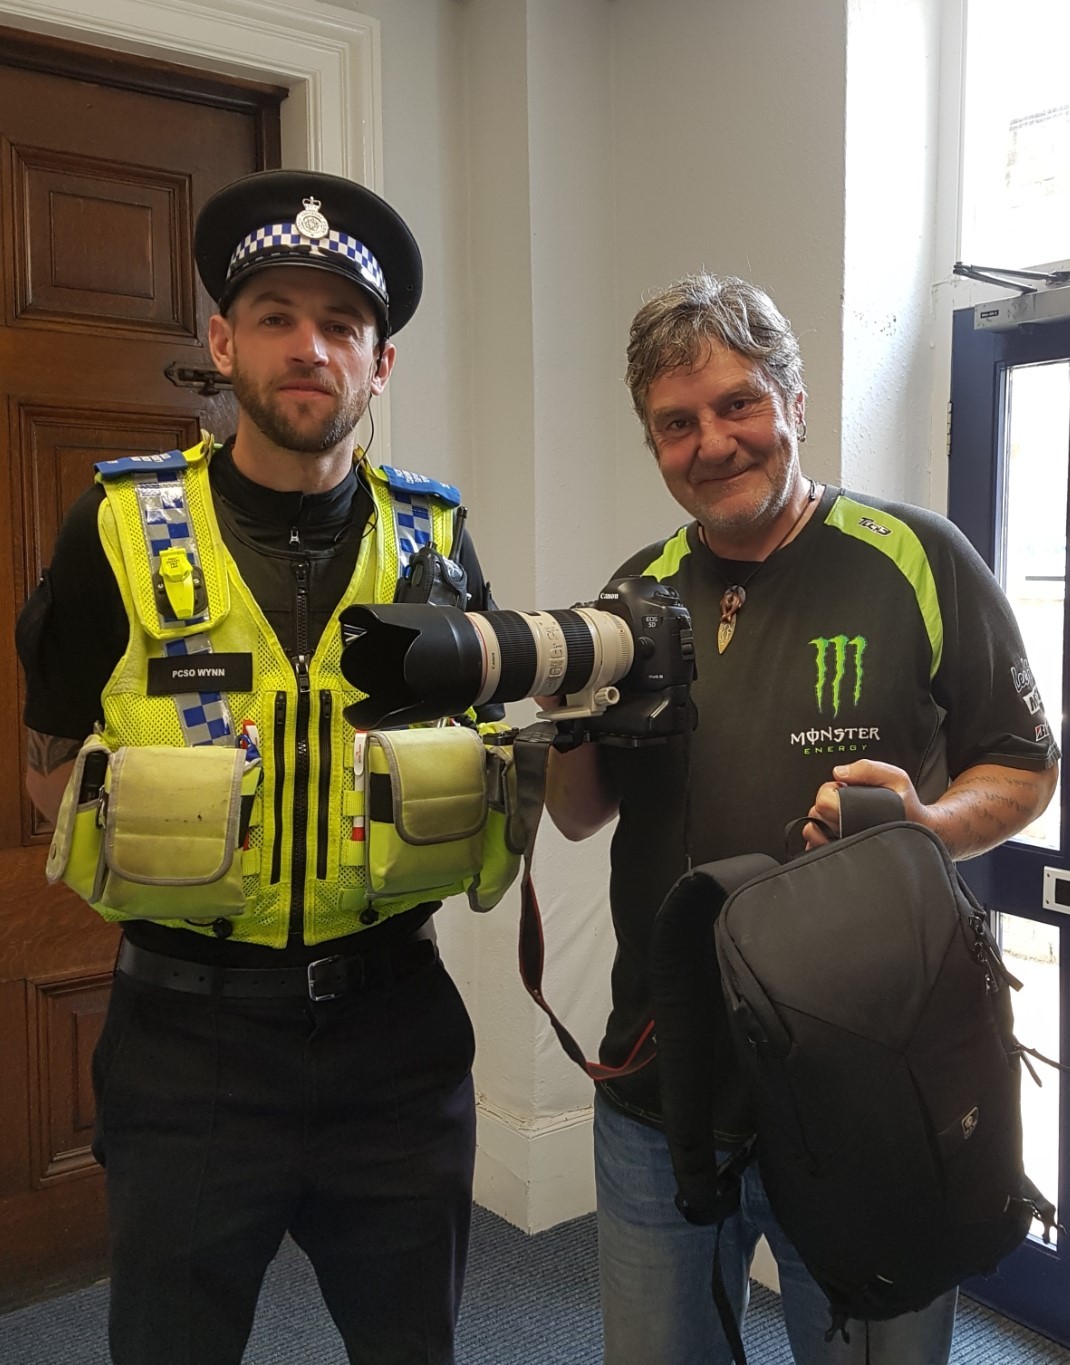 £6k camera reunited with owner